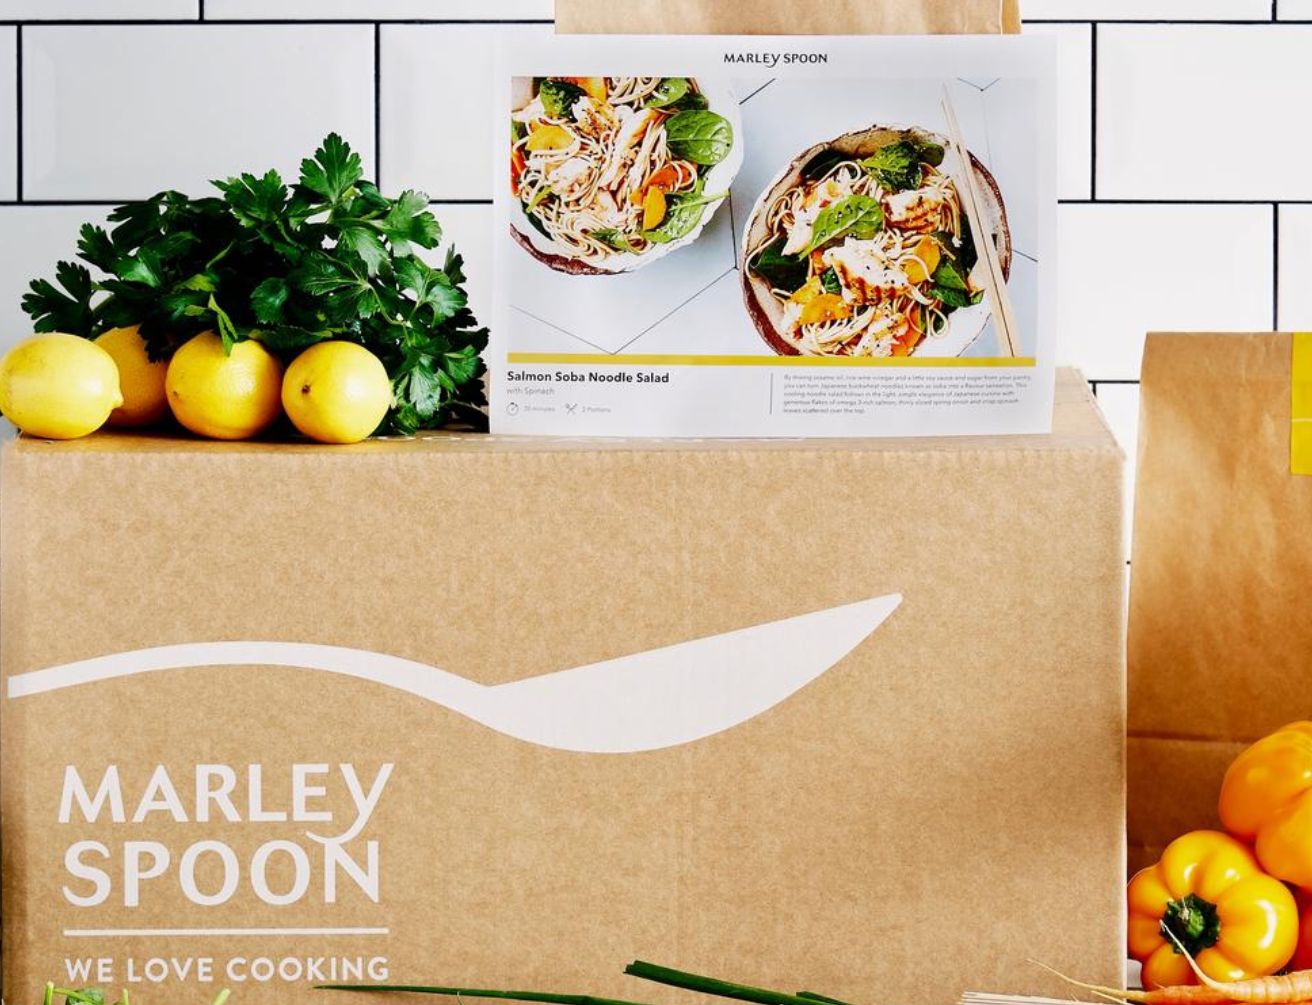 Woolworths Invests 30 Million In Marley Spoon